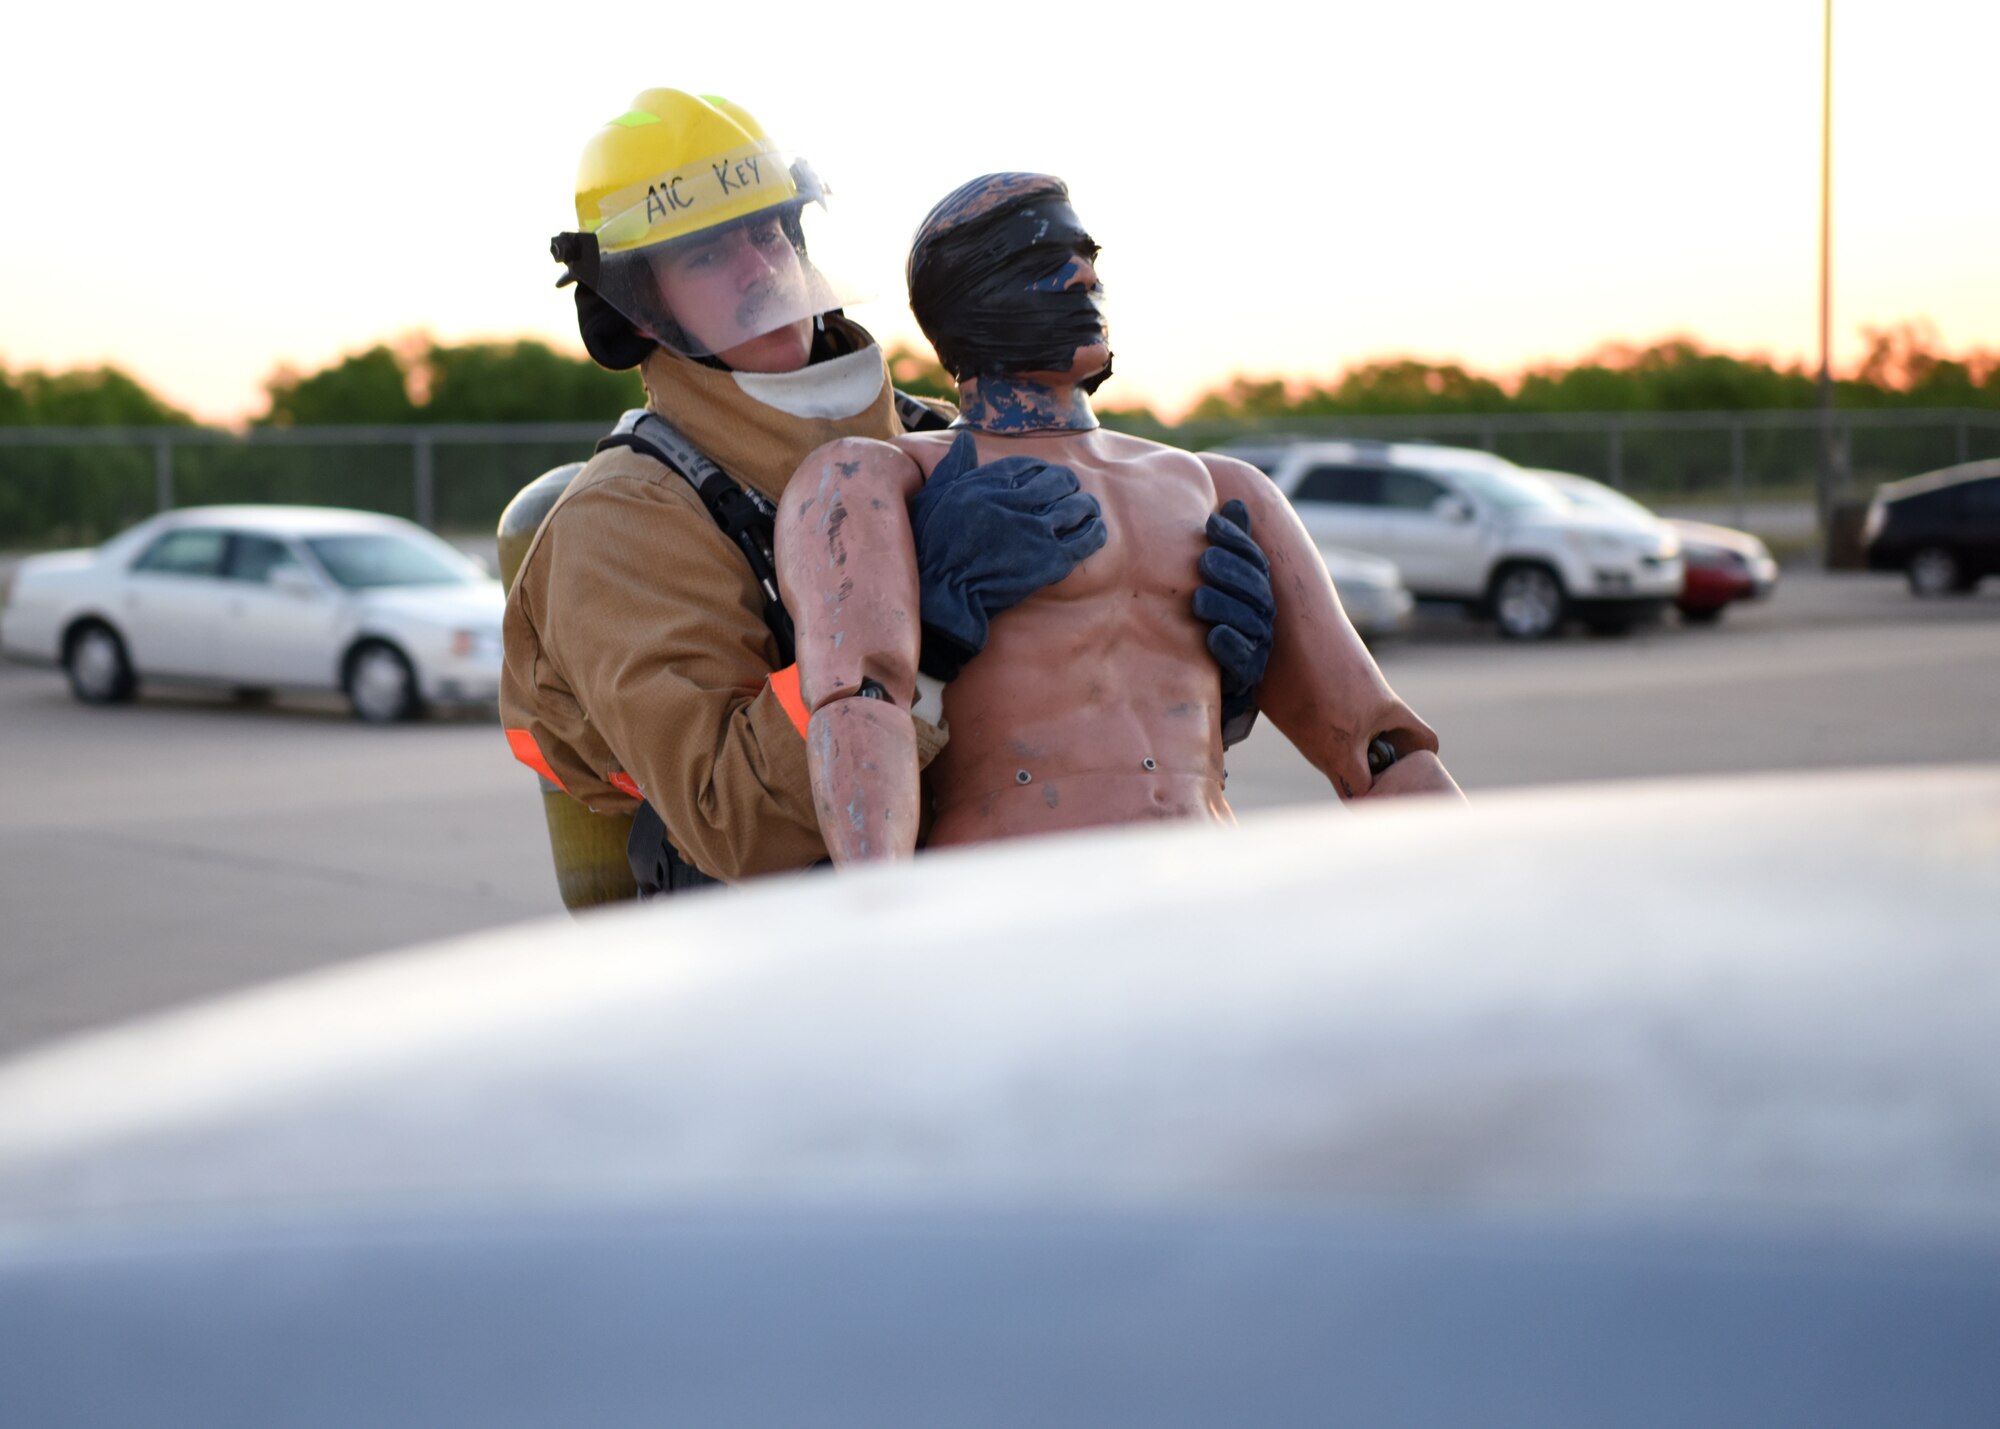 U.S. Air Force Airman 1st Class Coleman Key, 312th Training Squadron student, pulls a victim from a simulated car accident during his final exercise for Block III at the Louis F. Garland Department of Defense Fire Academy on Goodfellow Air Force Base, Texas, May 6, 2020. Key pulled from all the lessons he was taught to complete the exercise. (U.S. Air Force photo by Airman 1st Class Ethan Sherwood)